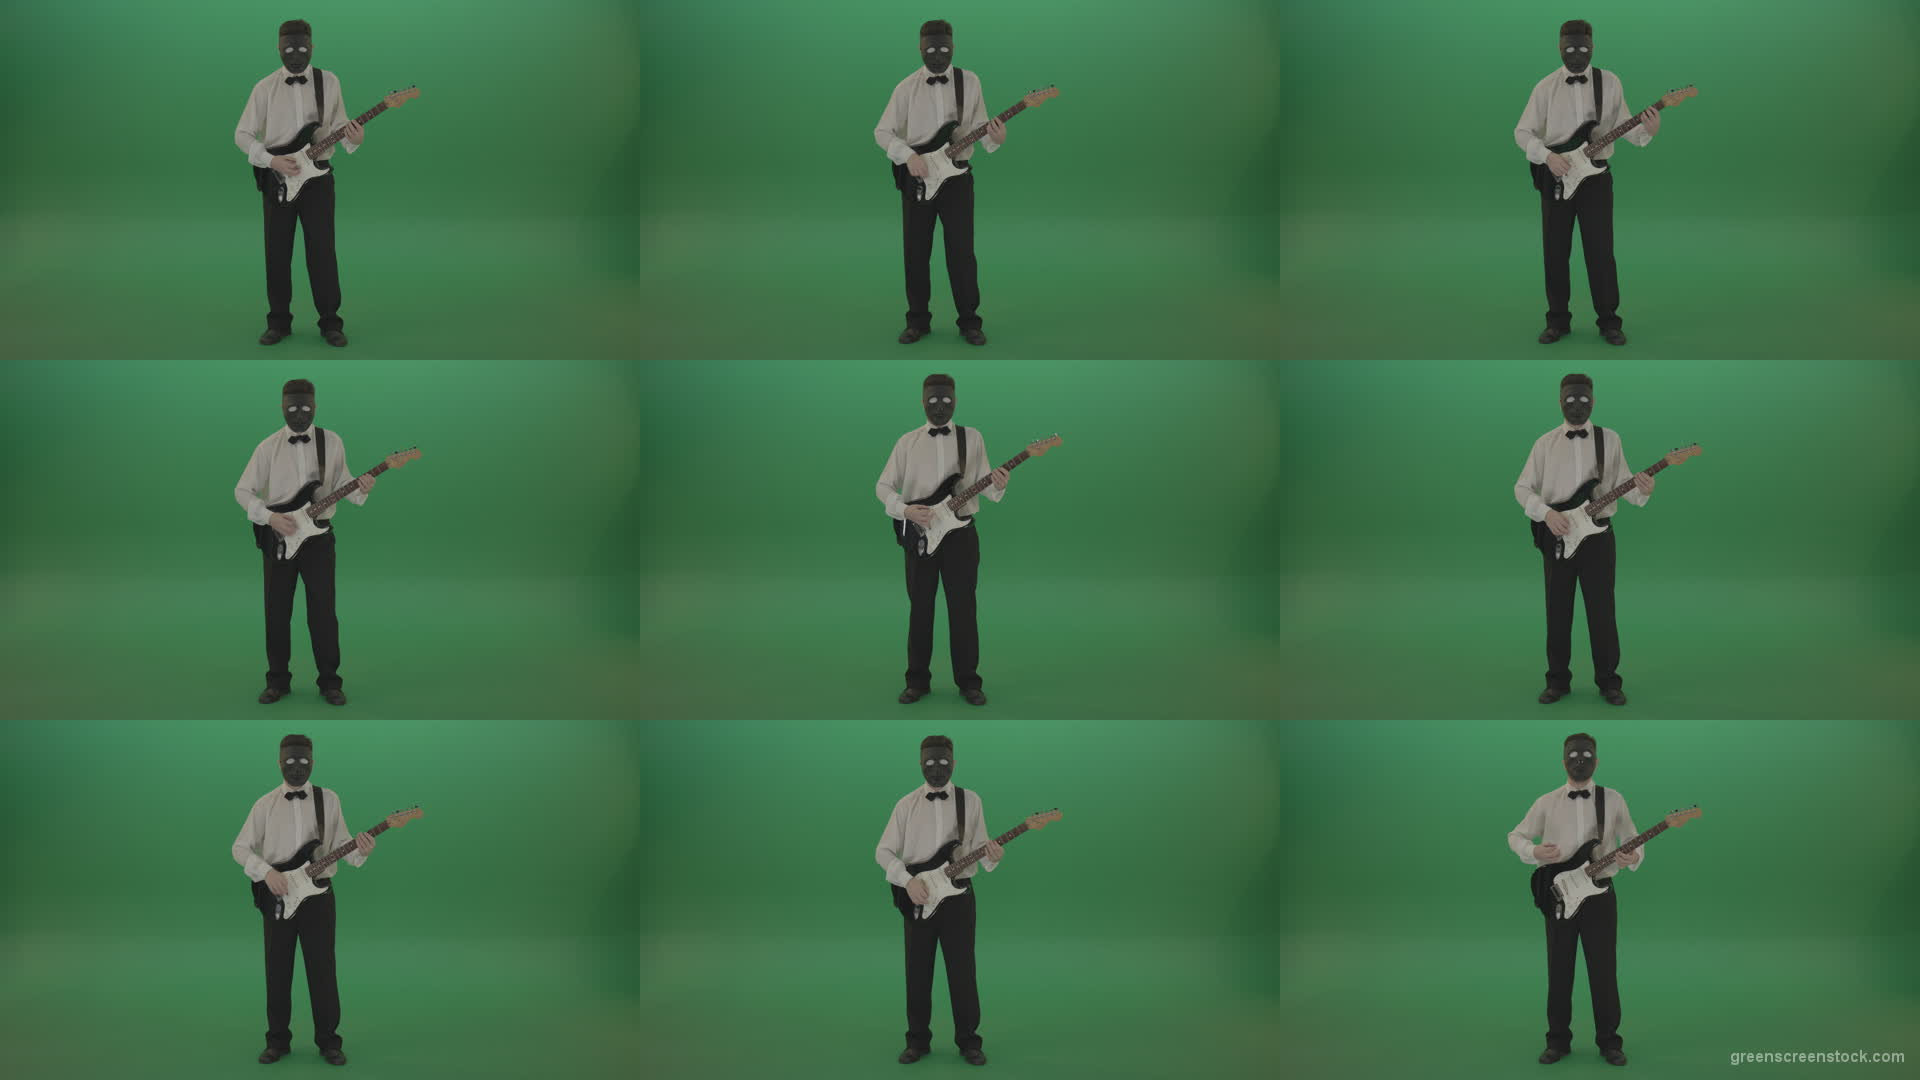 Classic-guitarist-in-white-shirt-play-guitar-in-mask-isolated-on-green-screen Green Screen Stock